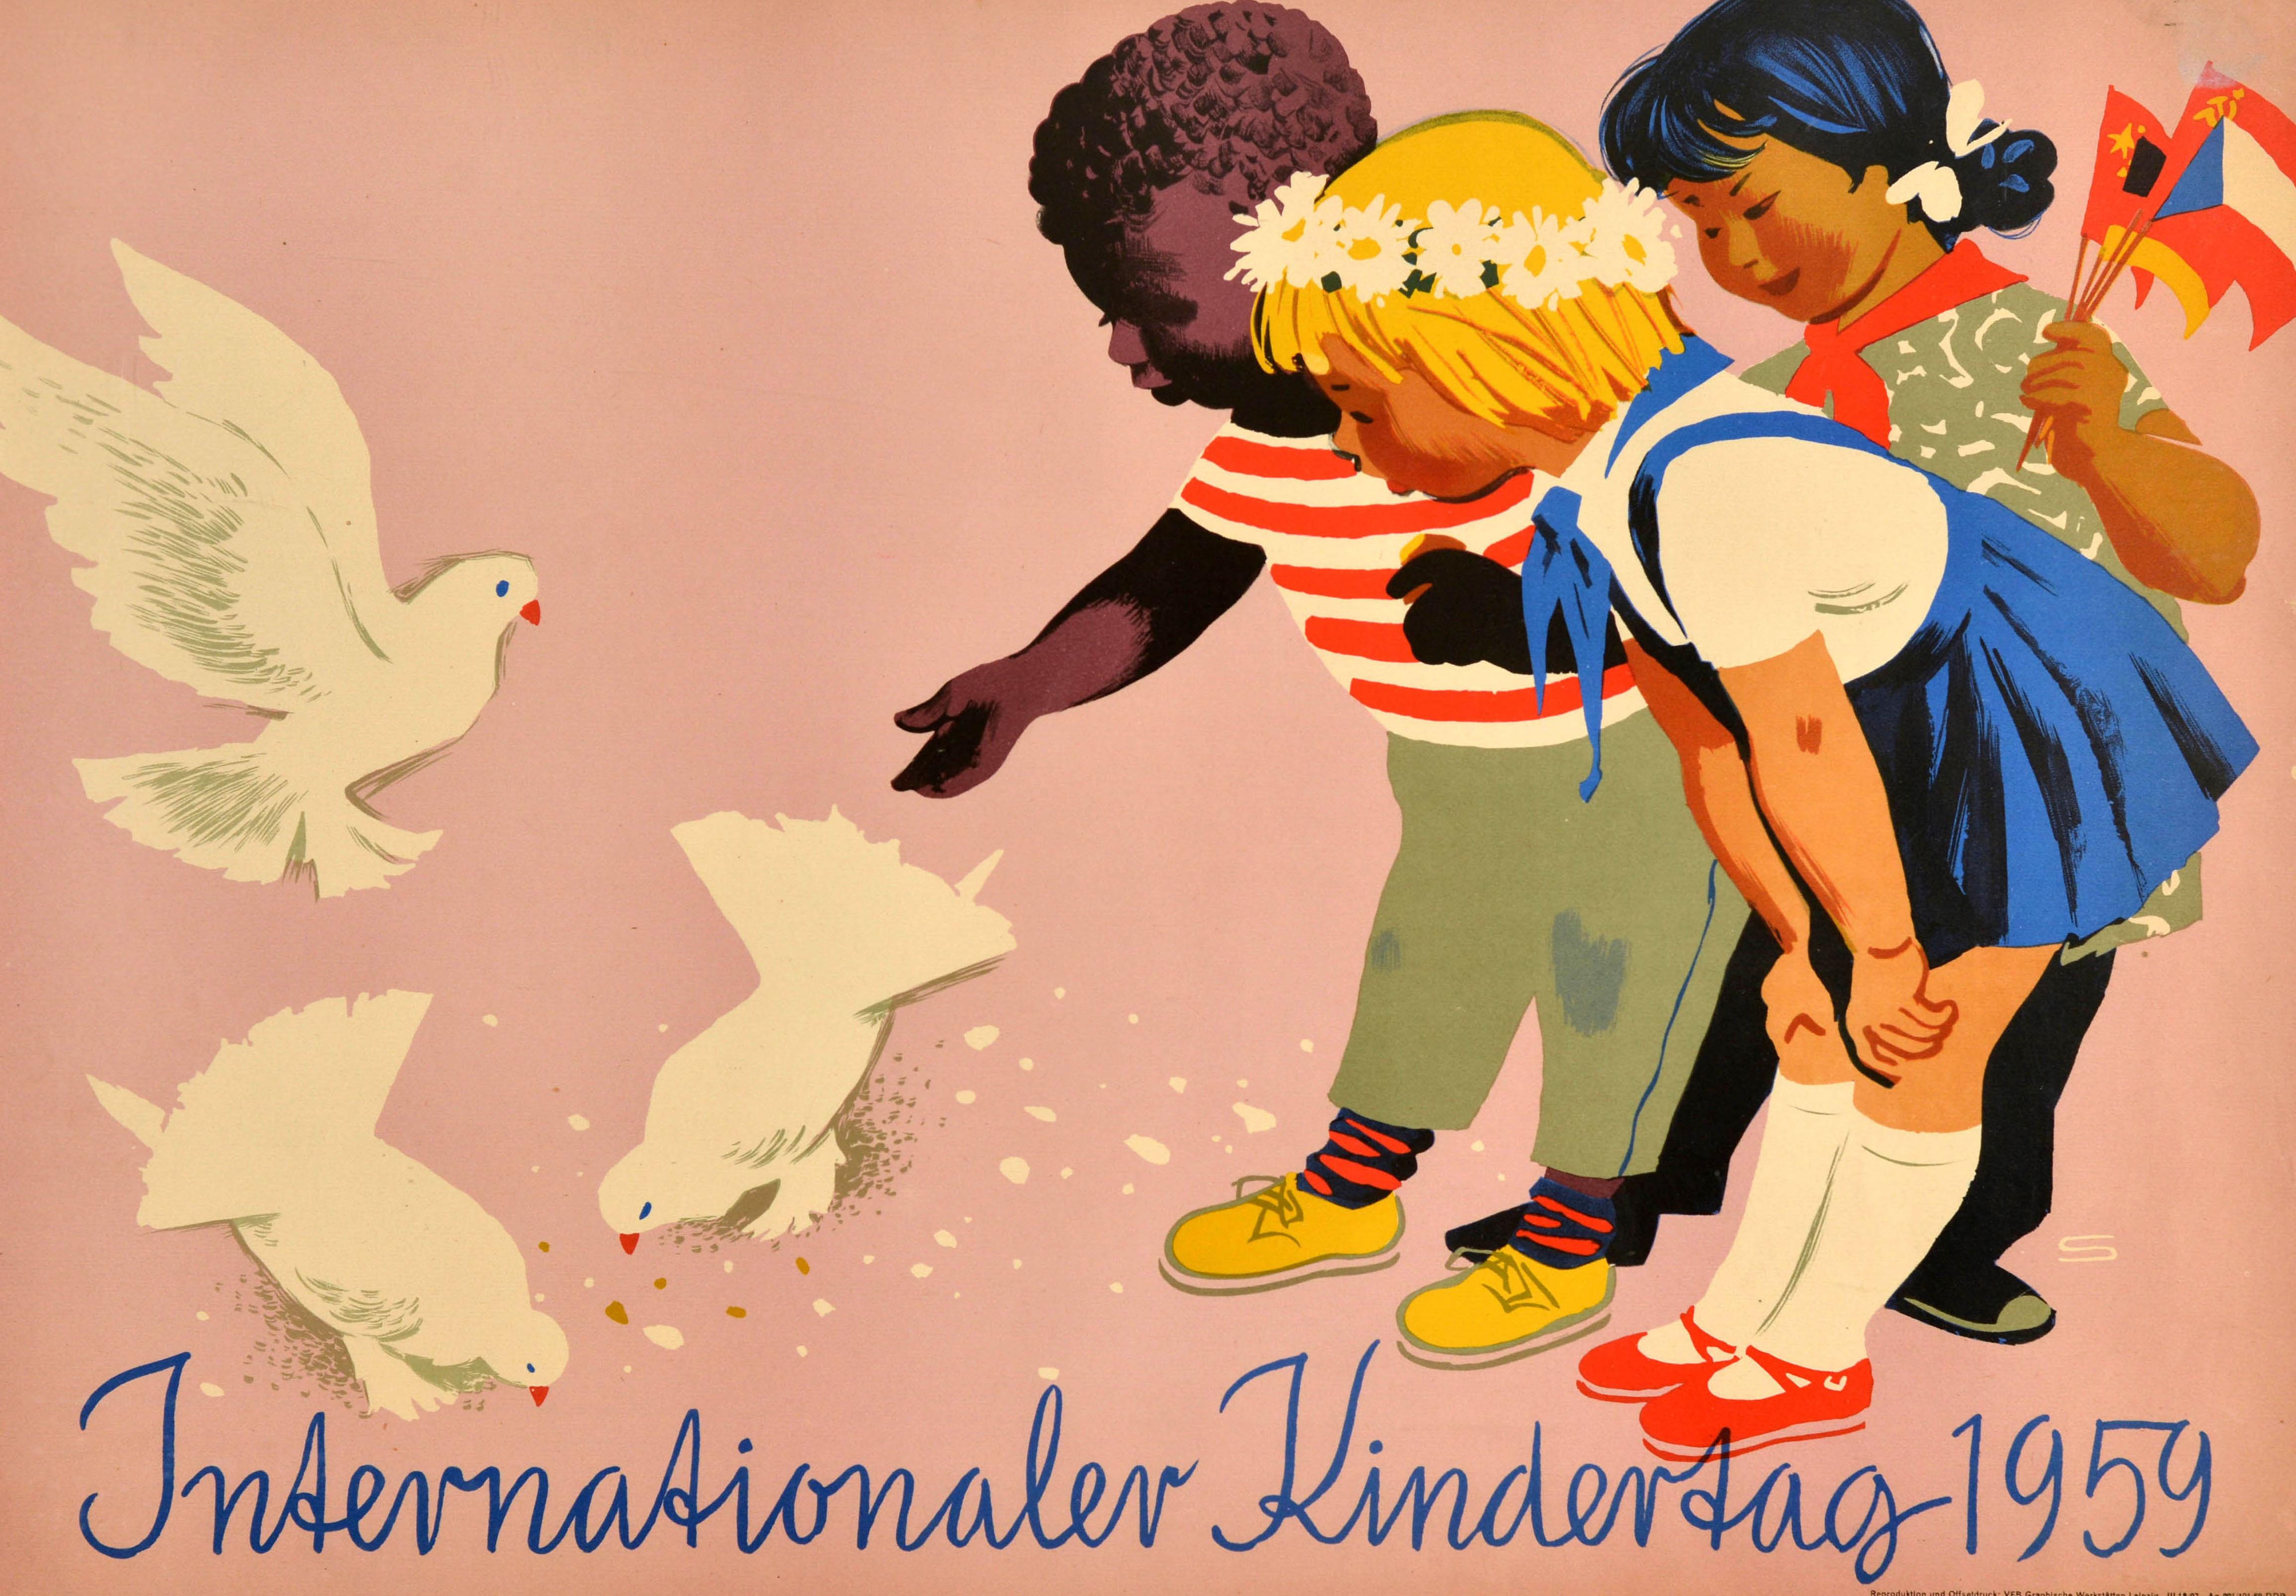 Original vintage poster for International Children's Day / Internationaler Kindertag 1959 featuring an illustration of three children from different nations feeding three white doves representing peace and watching them, one girl wearing a daisy